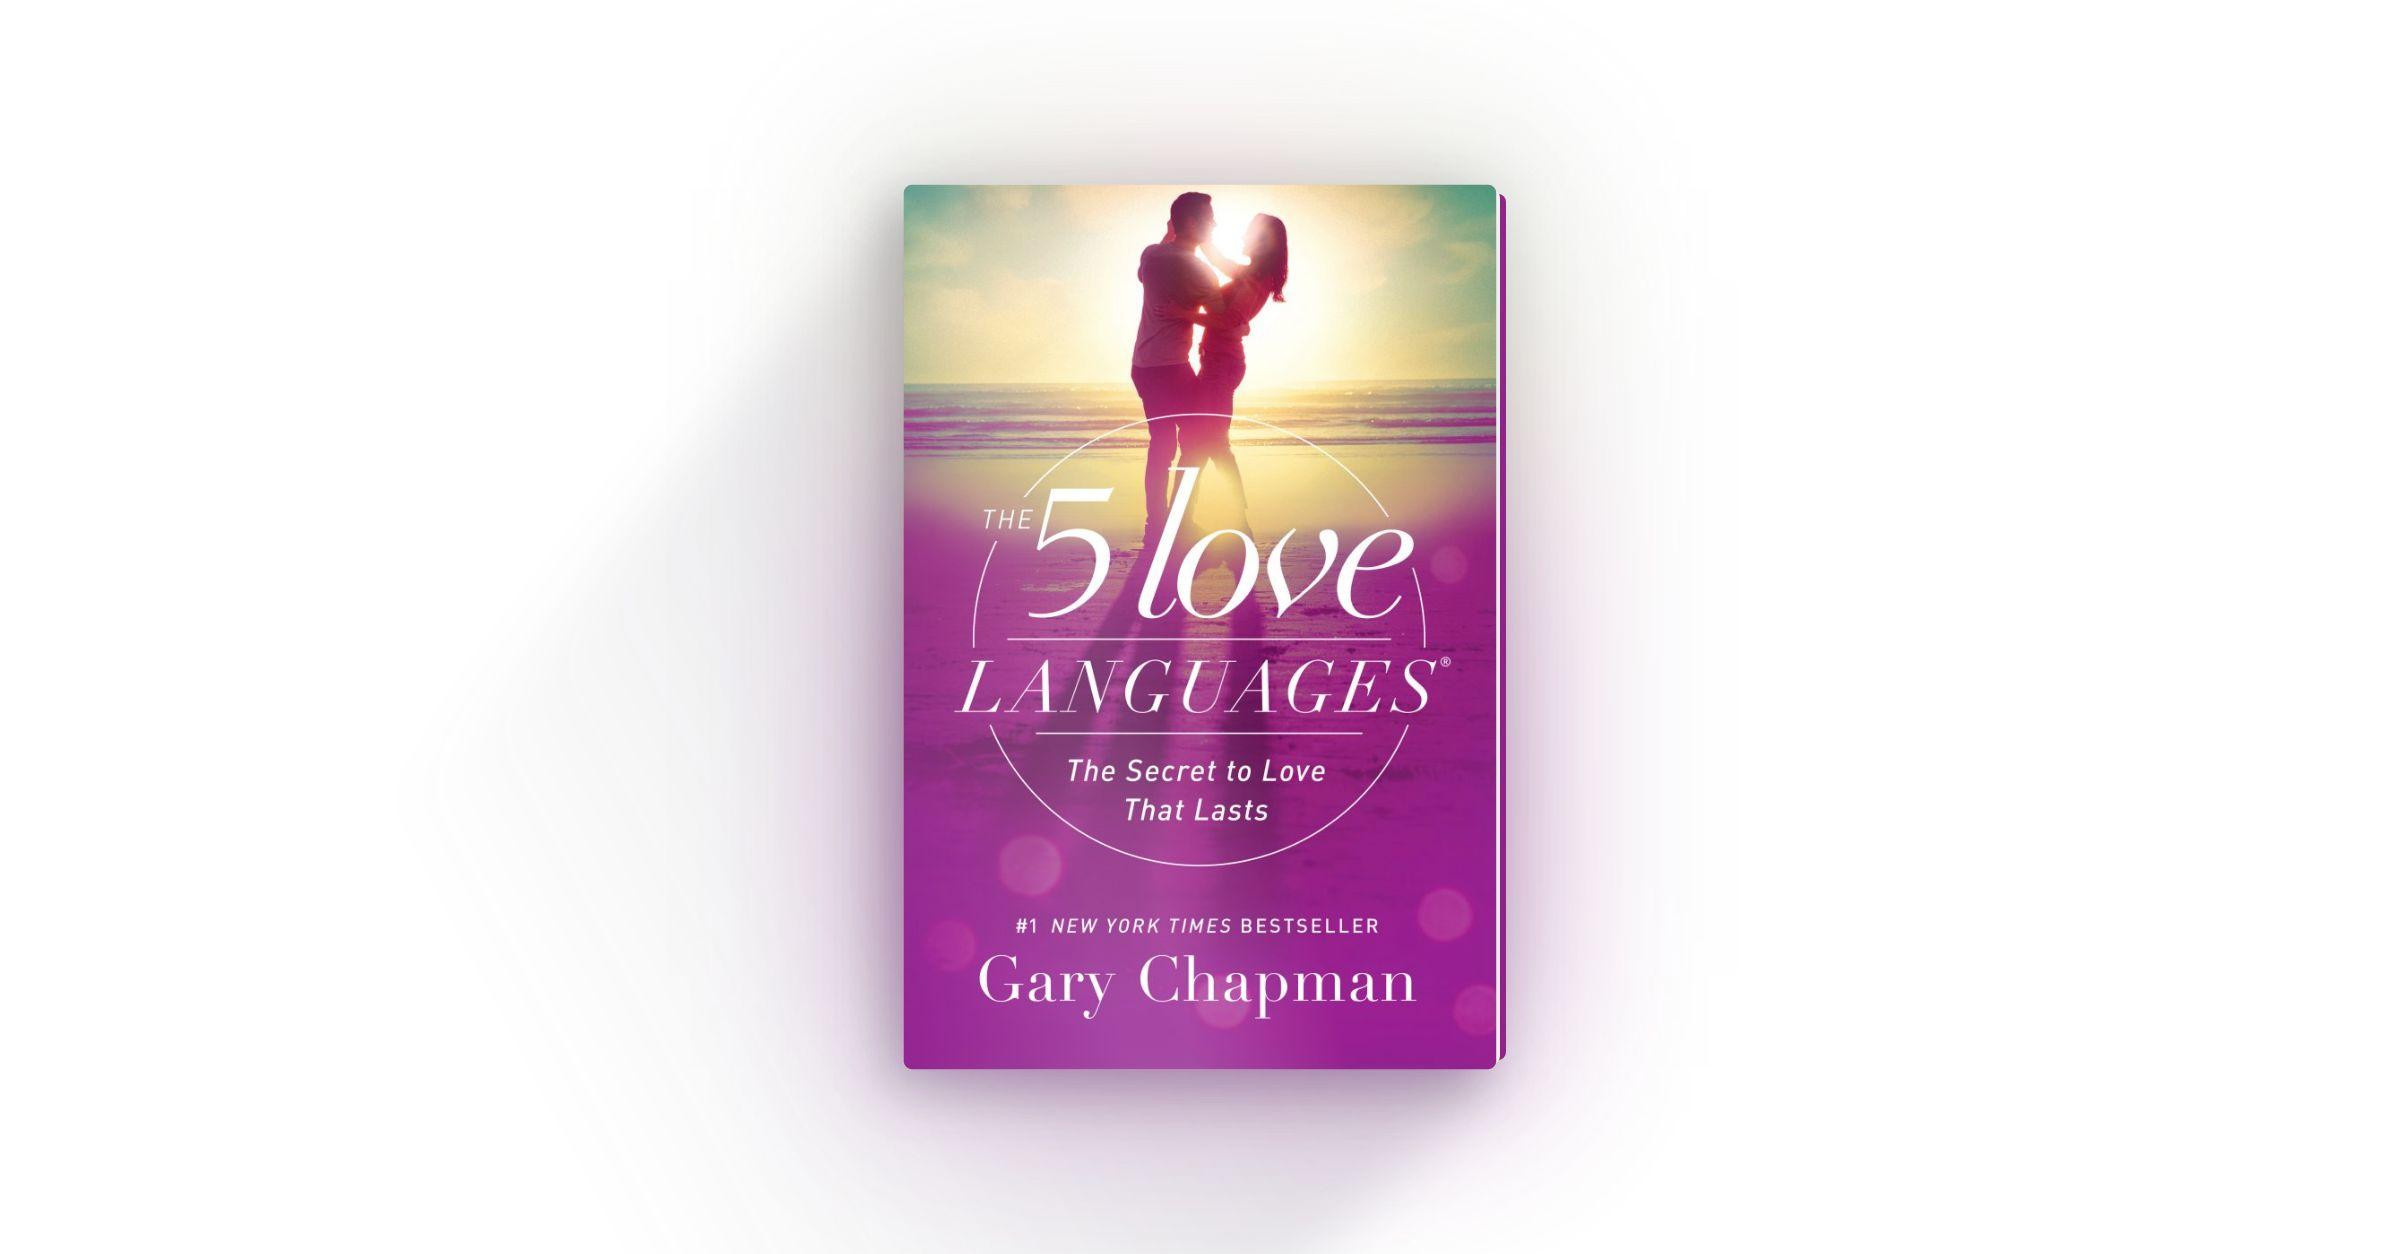 Love 5 сайт. The 5 Love languages: the Secret to Love that lasts" by Gary Chapman -. 5 Languages of Love. 5 Love languages by Gary Chapman. The language of Love игра.